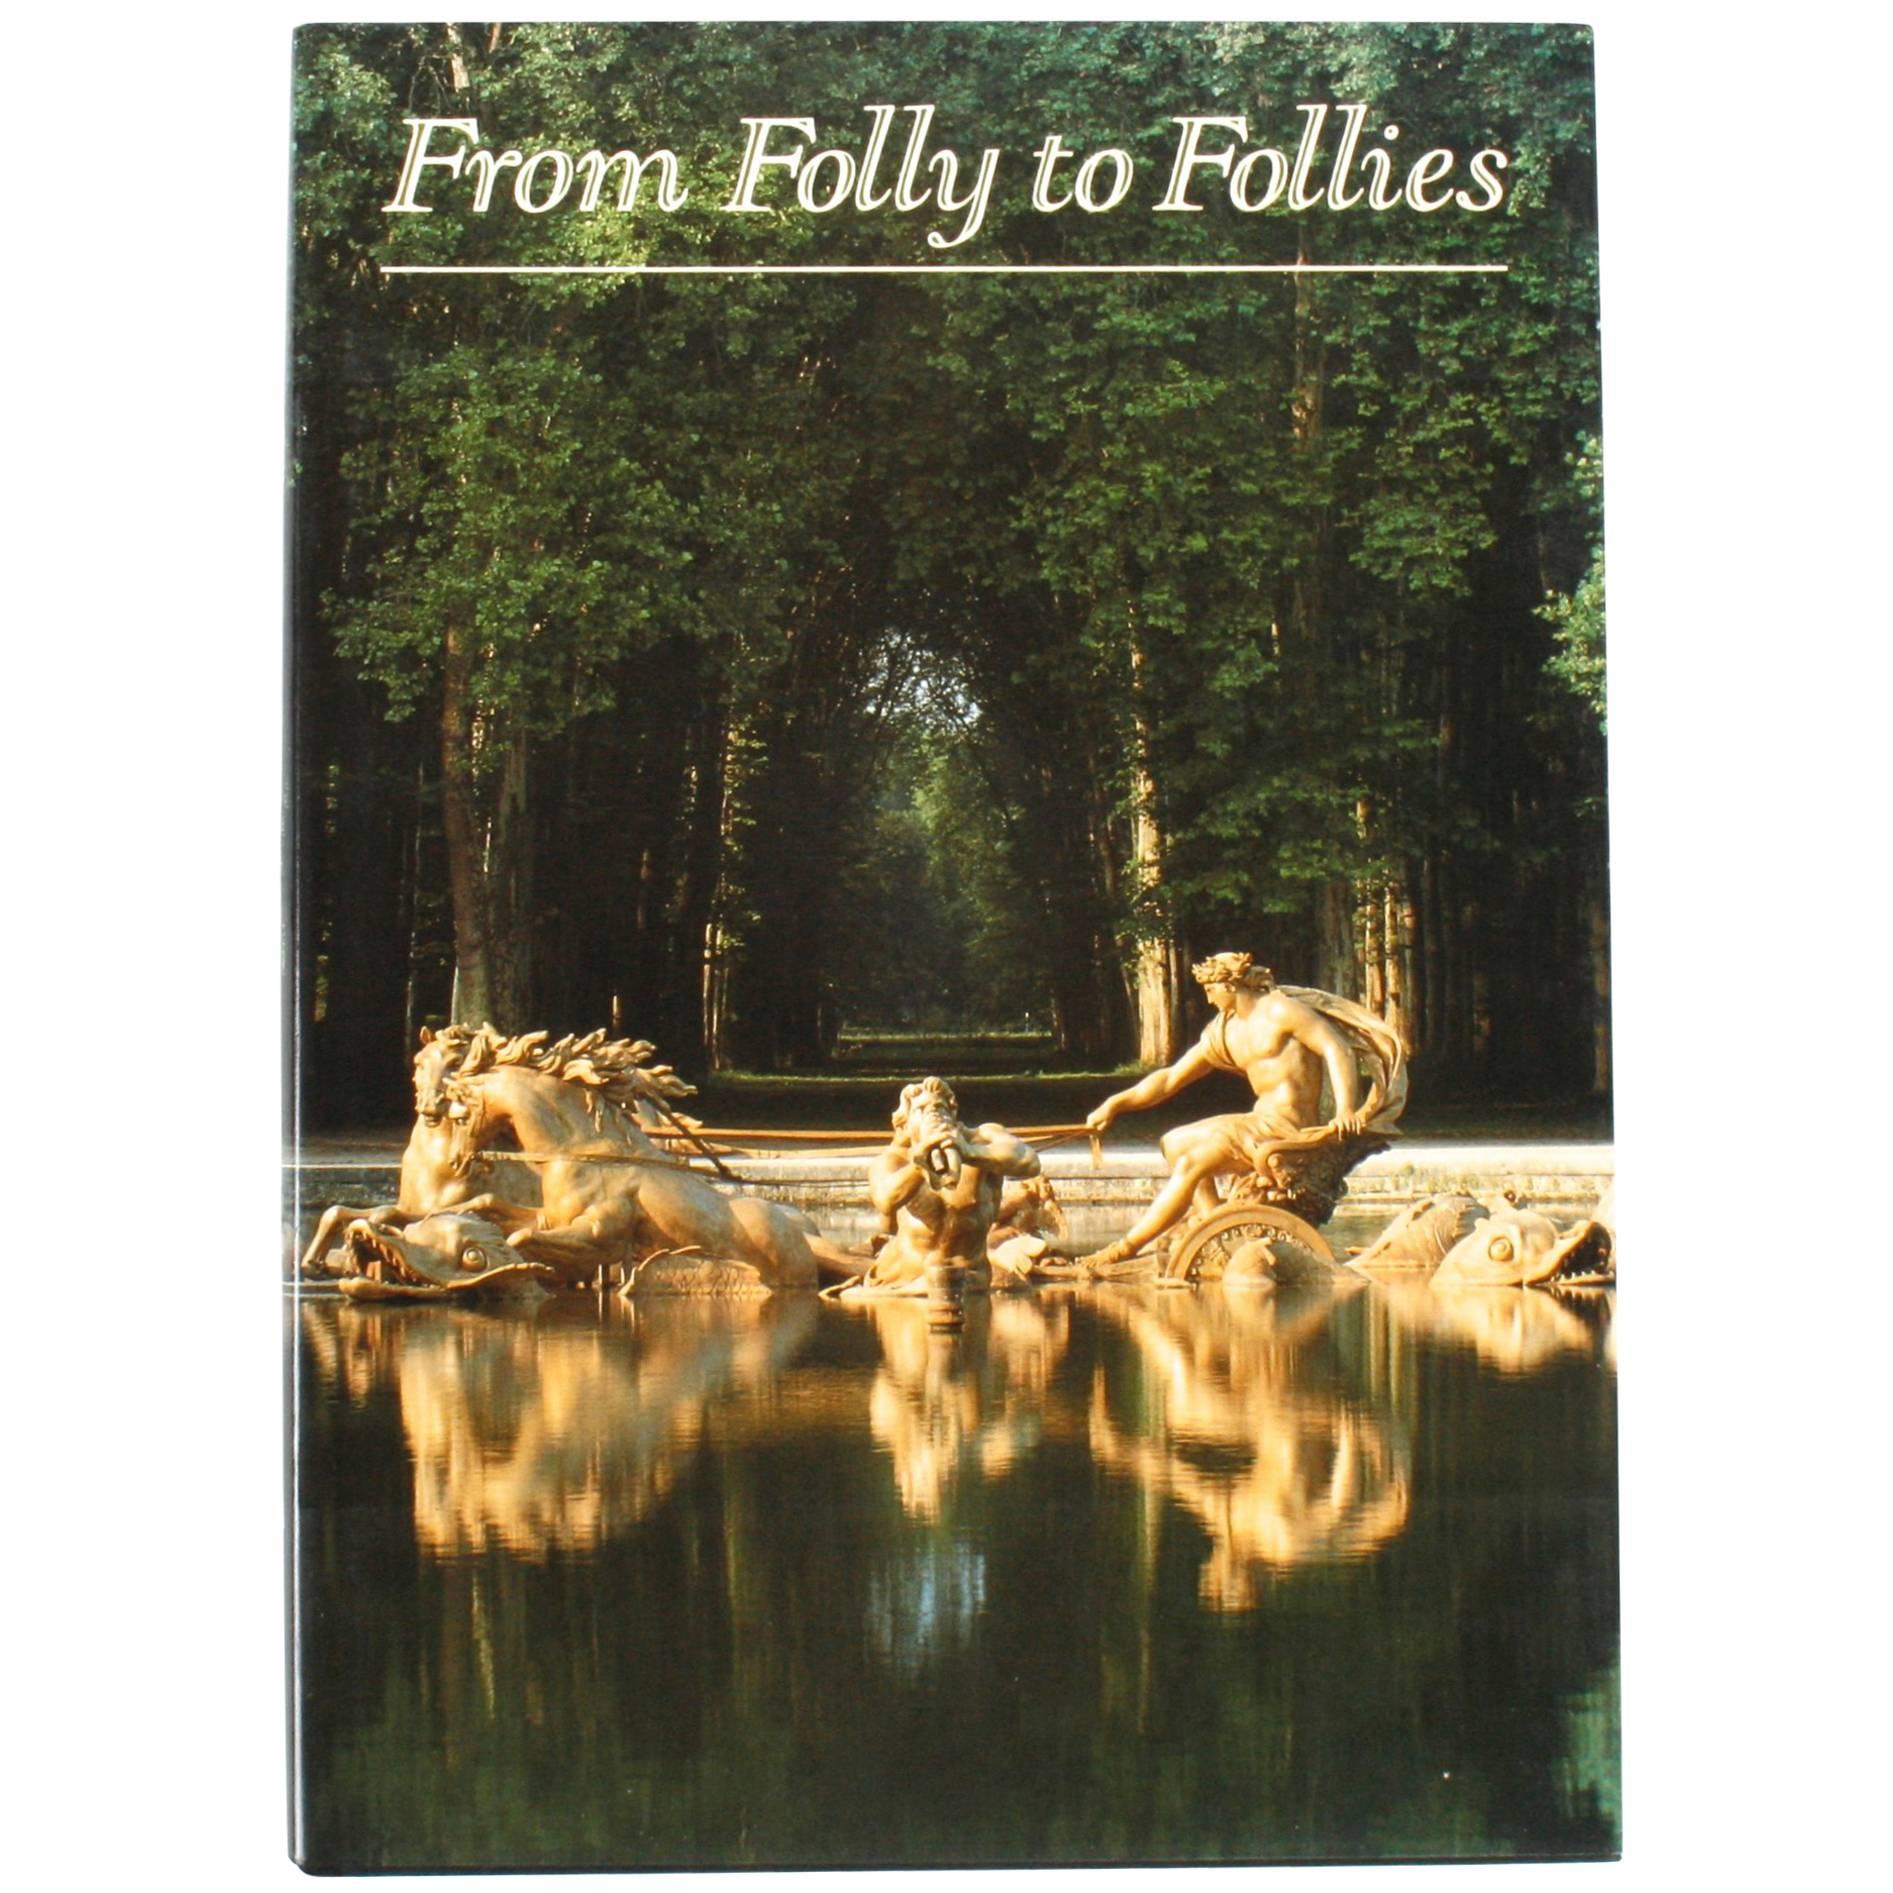 "From Folly to Follies", Discovering the World of Gardens, First Edition